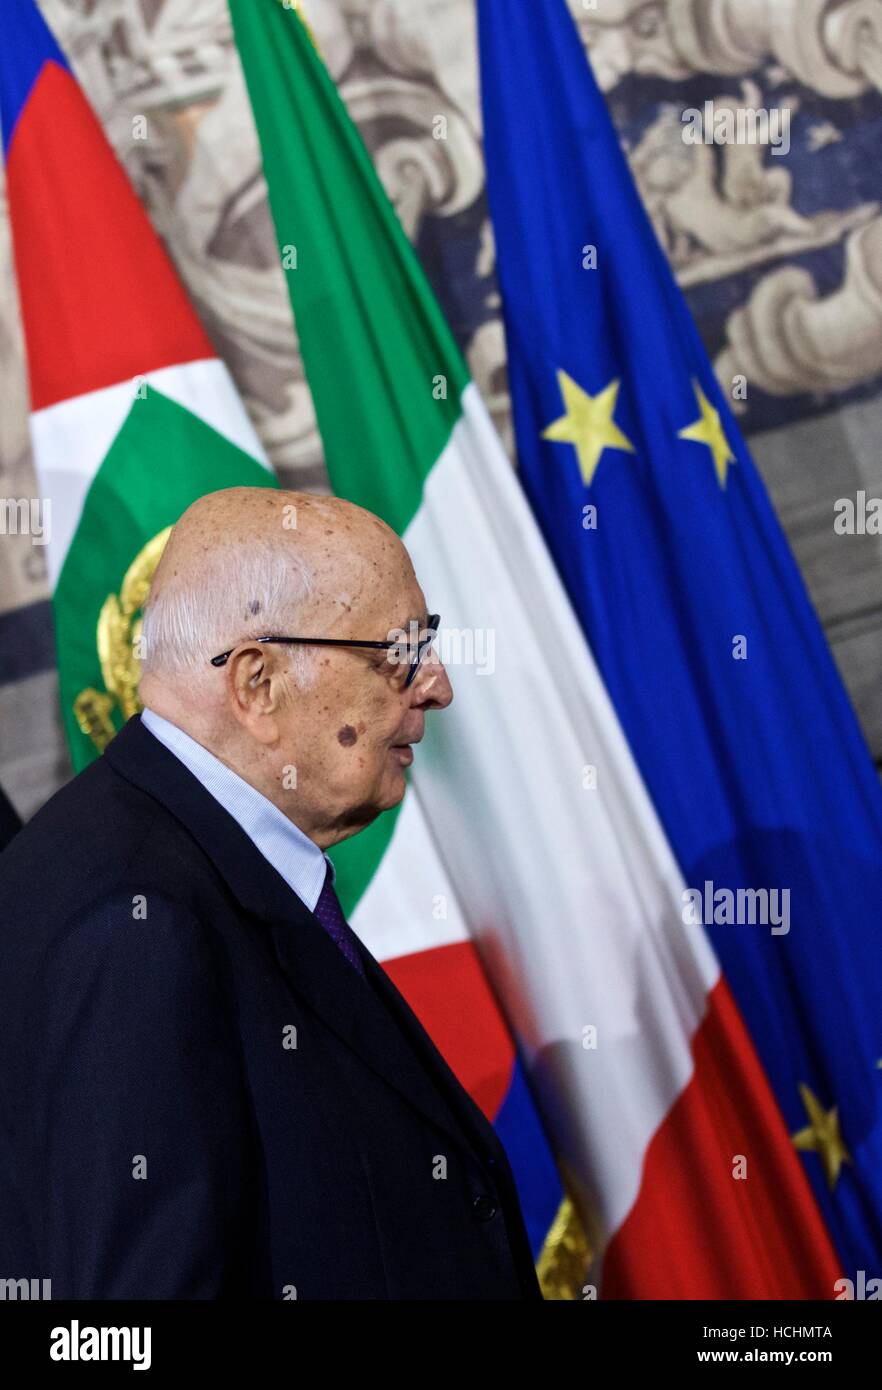 Rome, Italy. 8th Dec, 2016. Italian former President and senator Giorgio Napolitano leaves at the end of the first day of consultations with Italian President Sergio Mattarella at the Quirinale Palace in Rome, Italy, Dec. 8, 2016. Italian Prime Minister Matteo Renzi formally handed in his resignation to Mattarella after the country's 2017 budget was approved in Senate. The resignation now opened the way for the president to launch a round of talks with all party leaders in order to name a new prime minister, and form a transition government. © Jin Yu/Xinhua/Alamy Live News Stock Photo